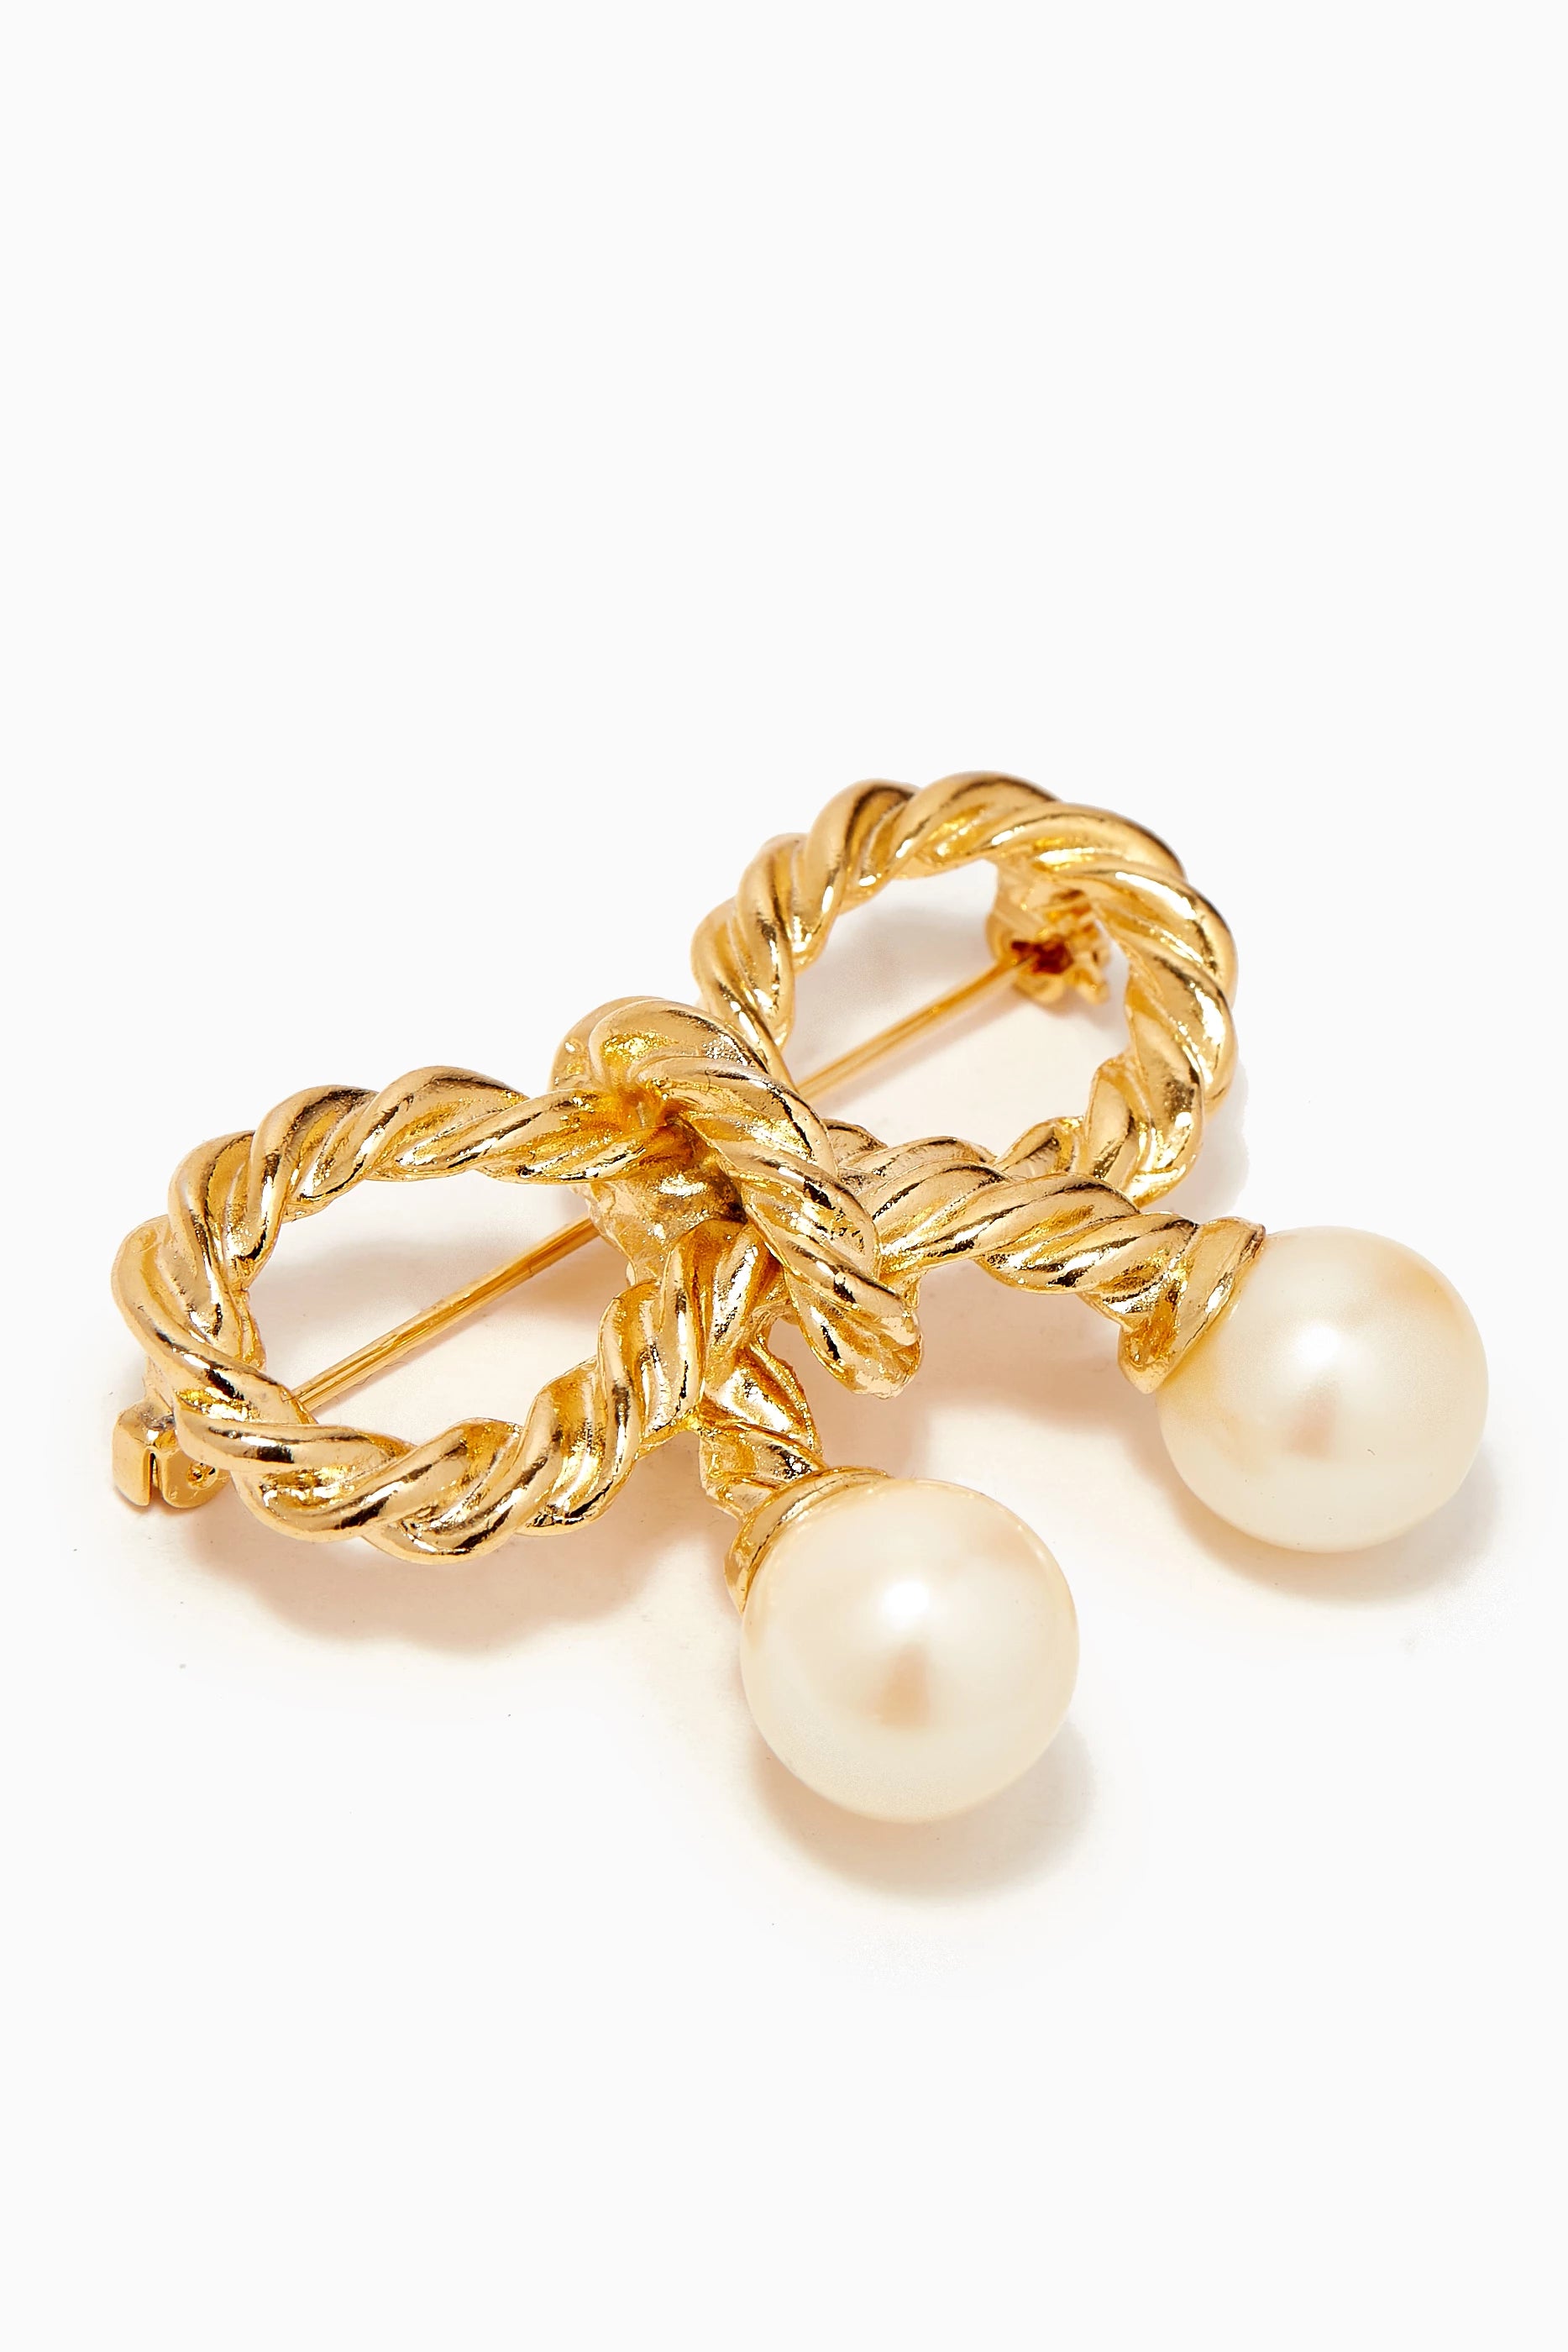 1980s Vintage Edwardian Revival Faux Pearl Bow Brooch